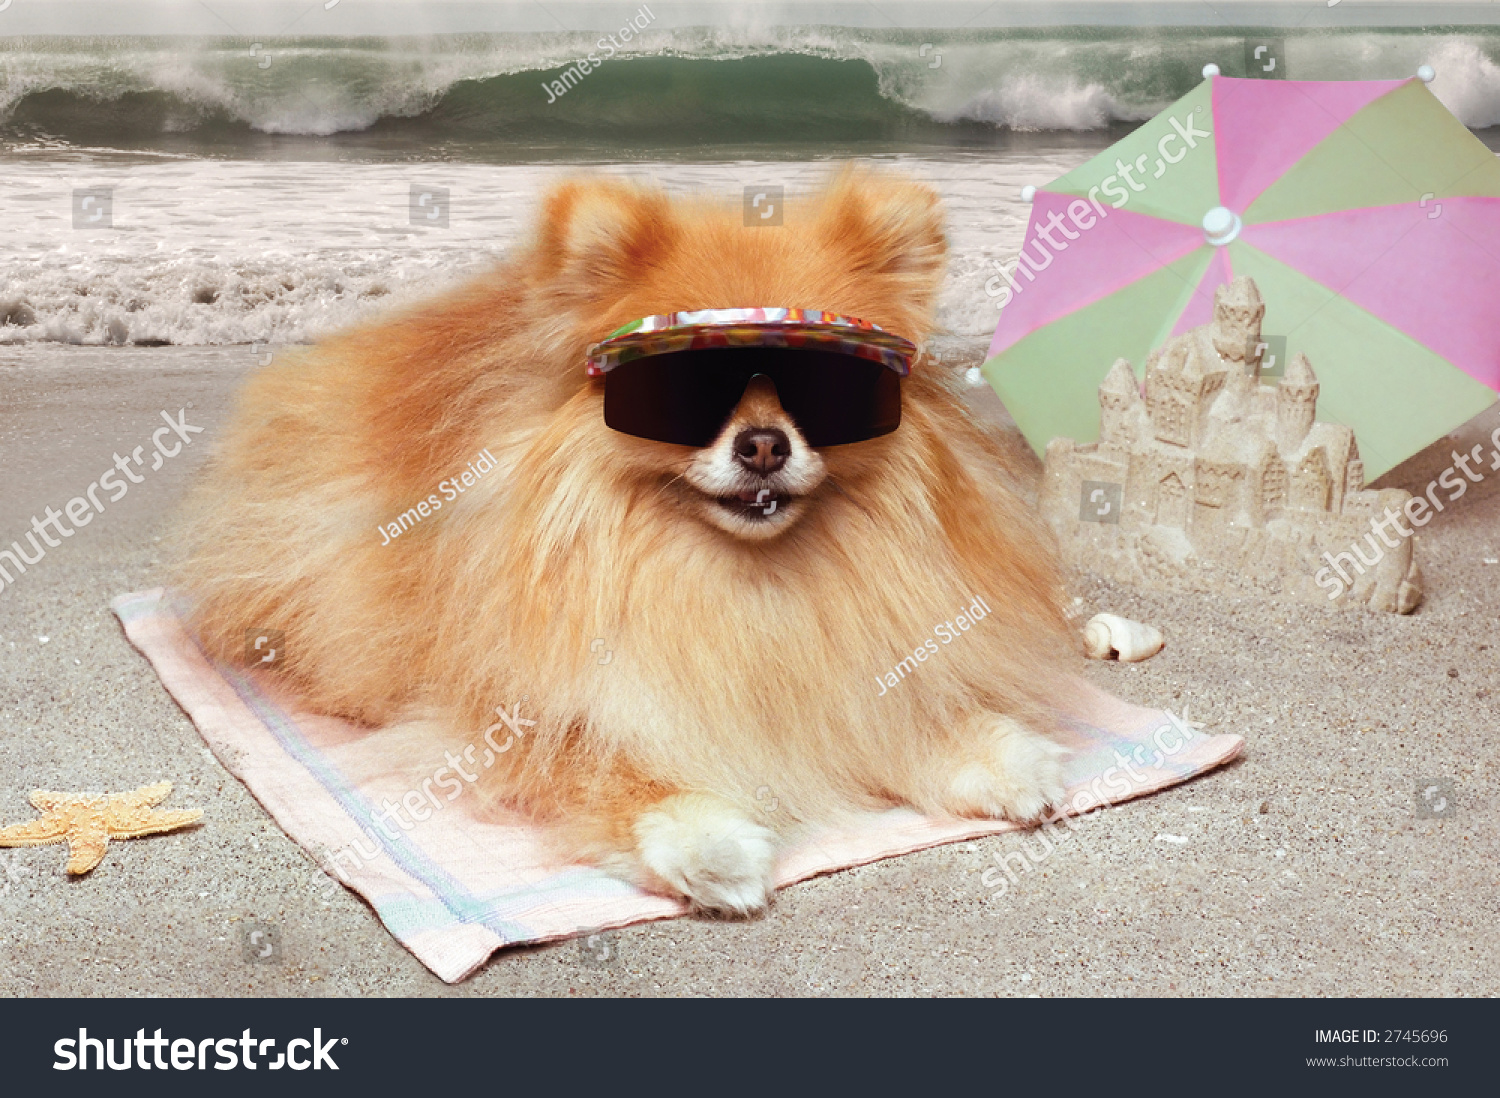 stock-photo-pomeranian-dog-wearing-sunglasses-lying-on-a-towel-at-the-beach-with-sandcastle-umbrella-and-2745696.jpg